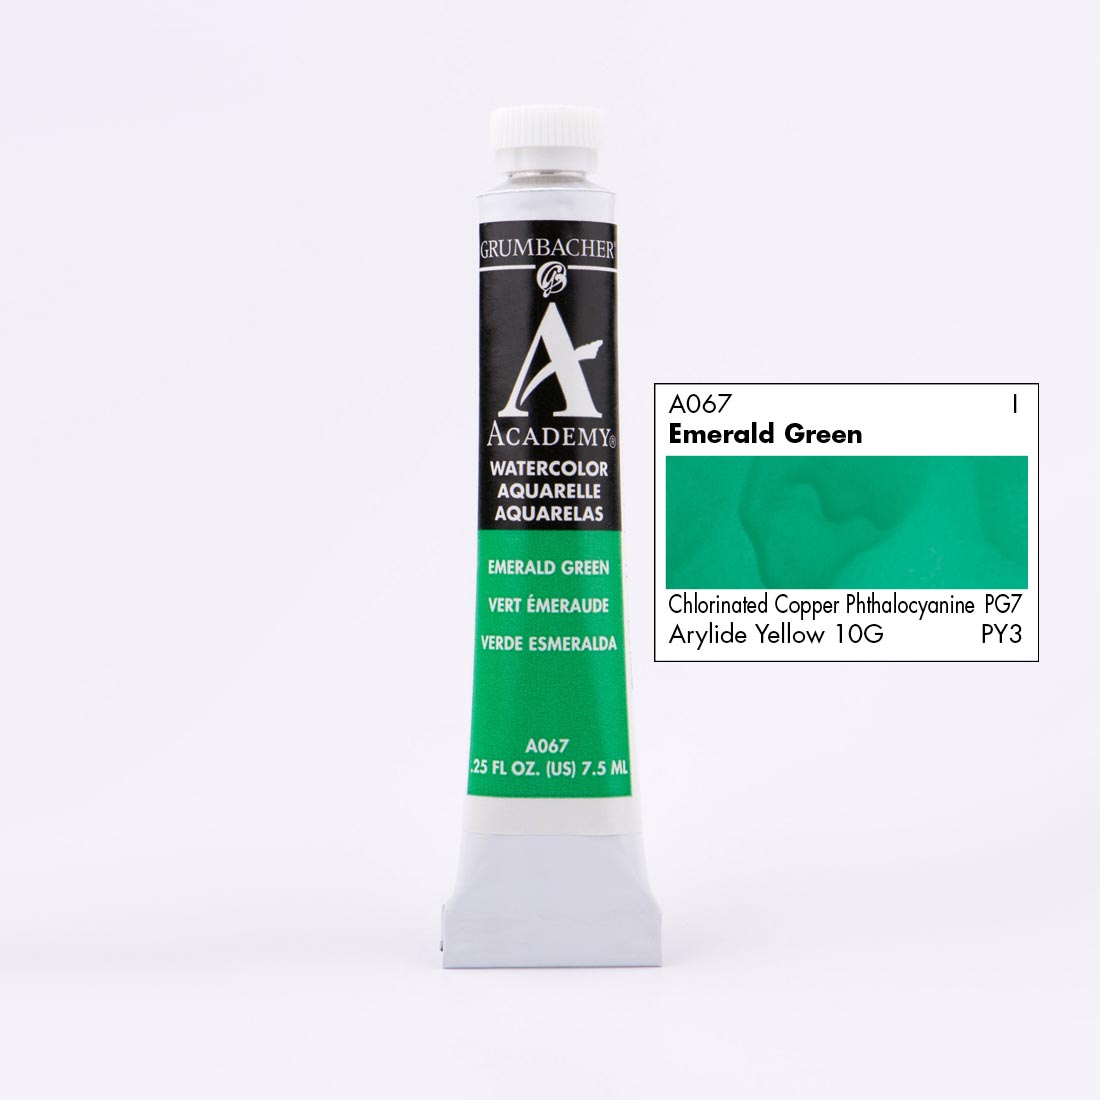 Tube of Grumbacher Academy Watercolor beside Emerald Green color swatch